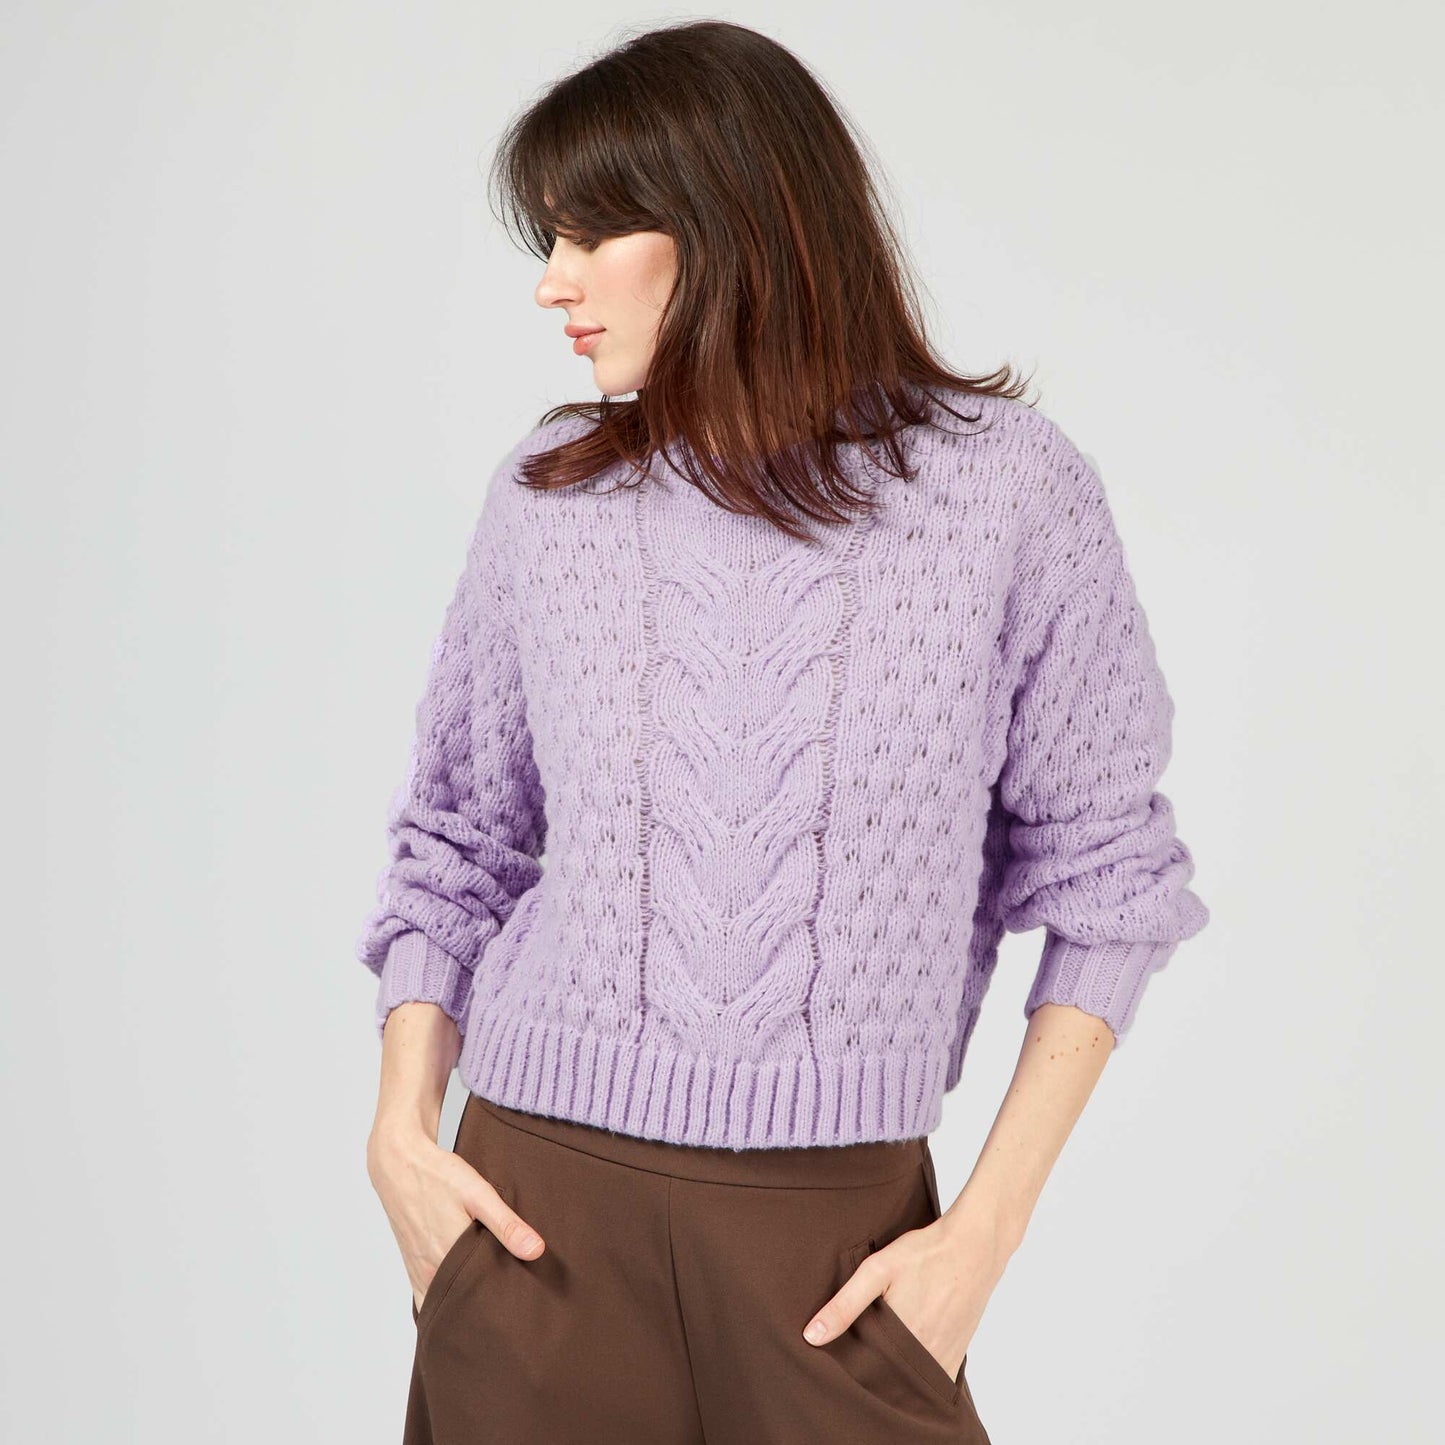 Woven knit sweater PURPLE_ROS